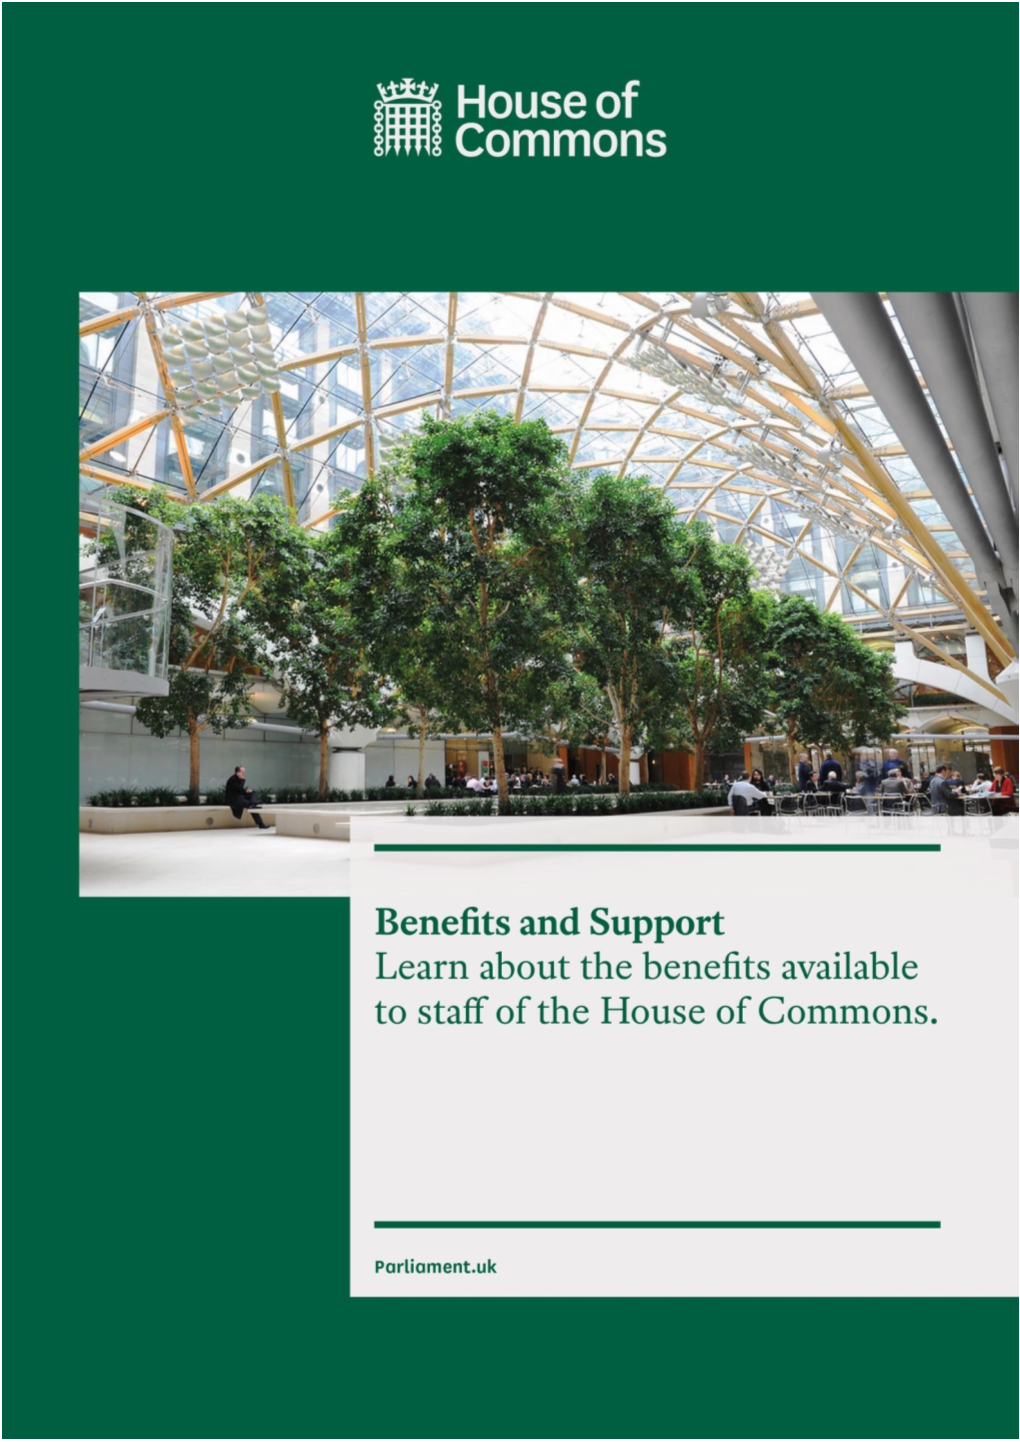 House of Commons Benefits and Support 1